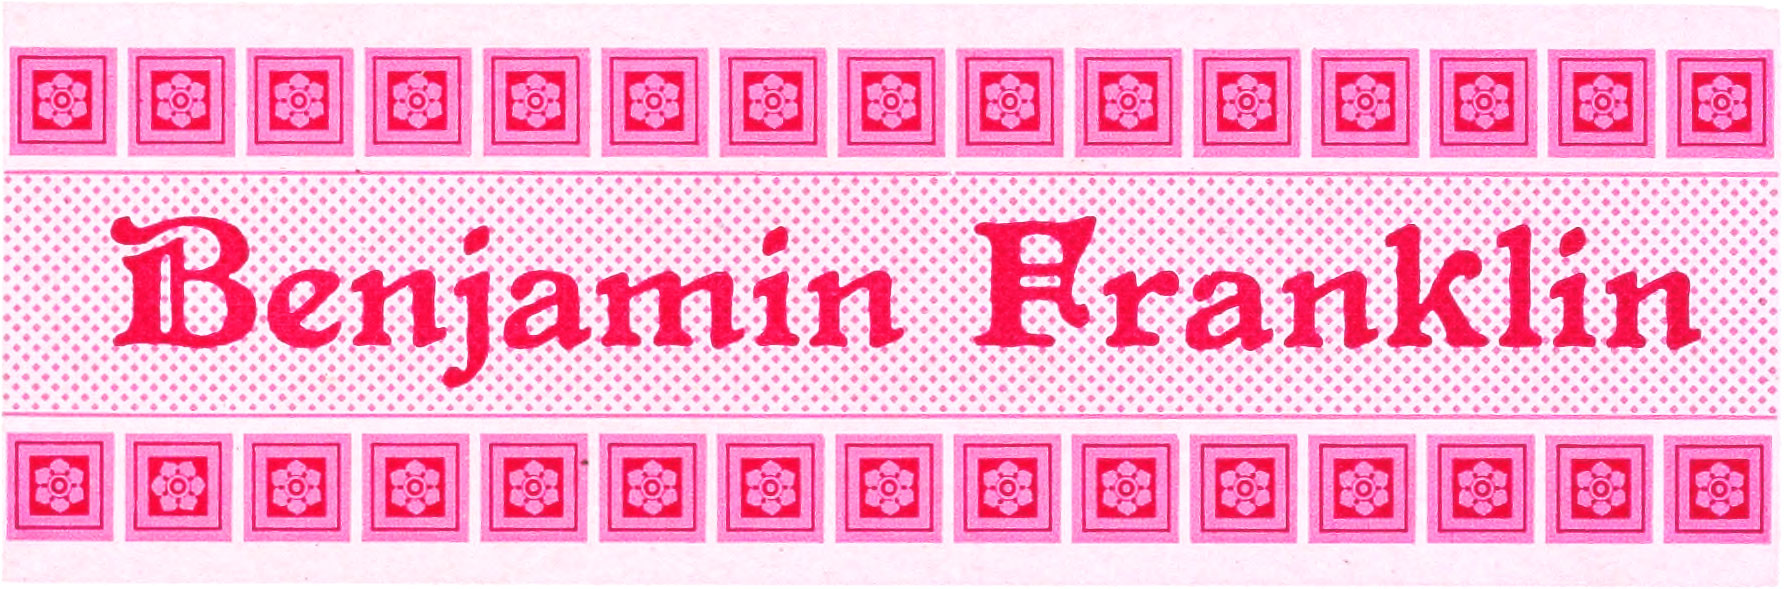 Ornate border comprising shades of pink with the words 'Benjamin Franklin' in the middle